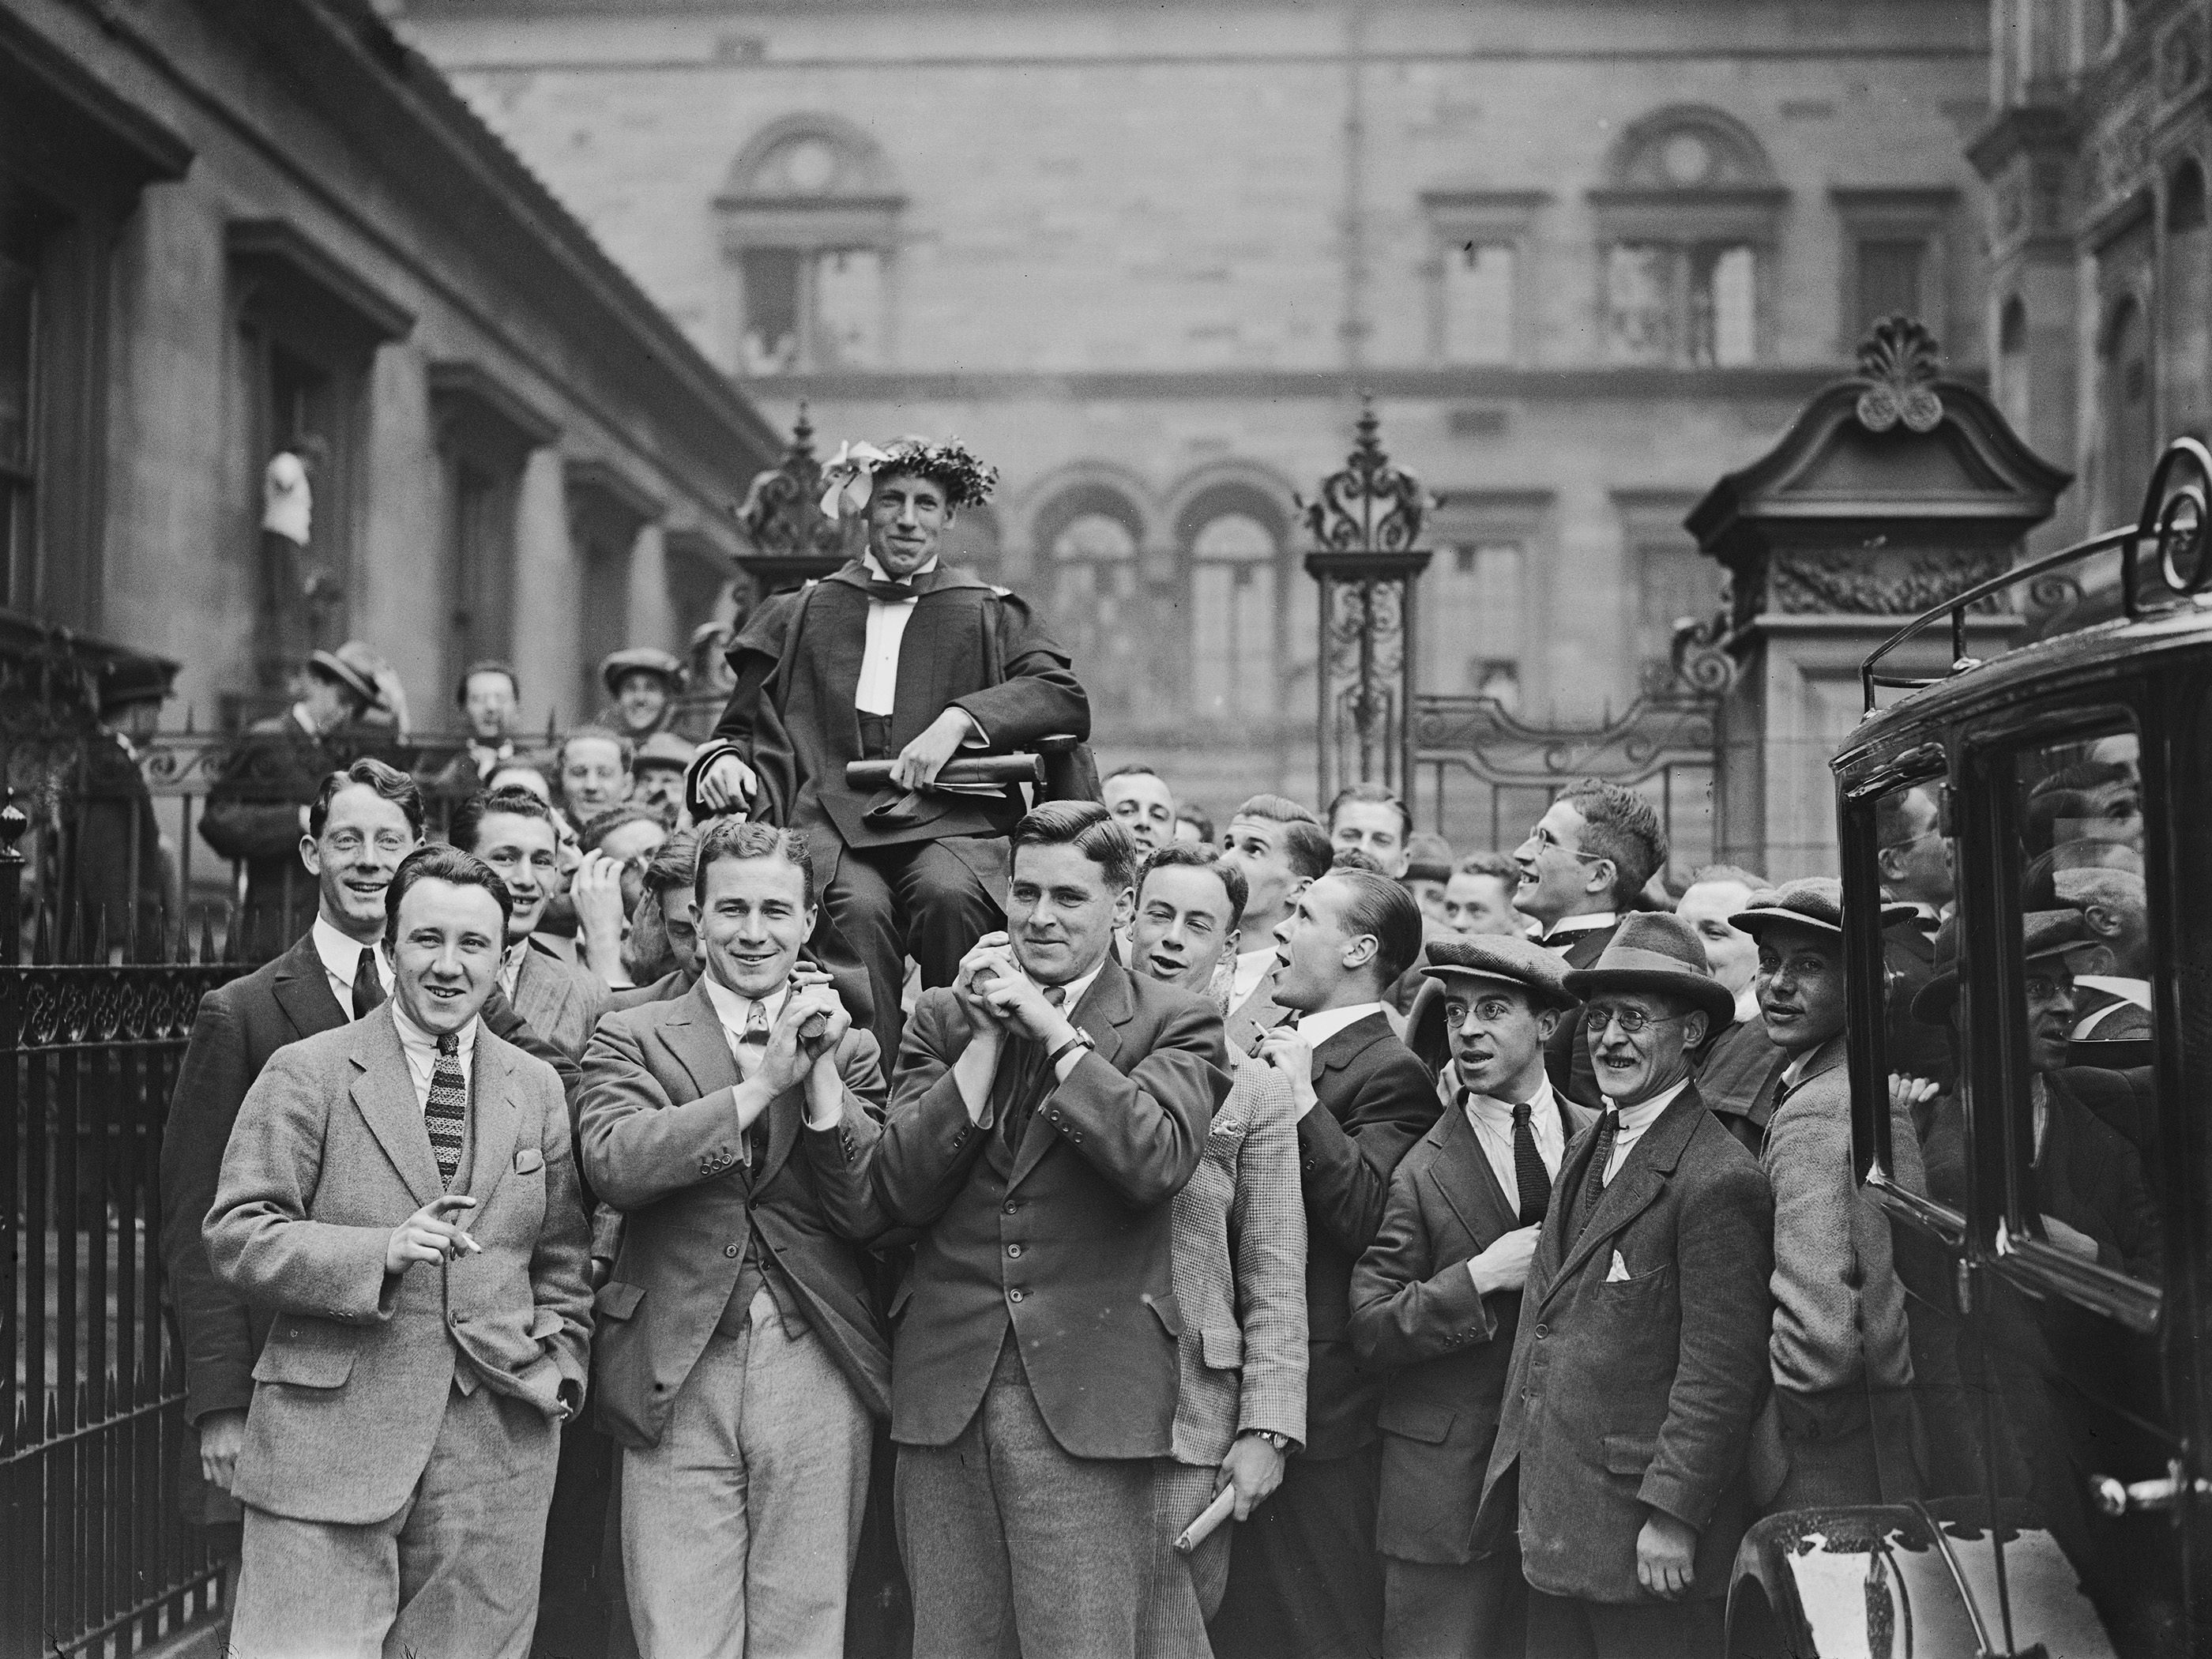 Eric Liddell is paraded by fellow students around Edinburgh University after his 1924 Olympic 400m title win